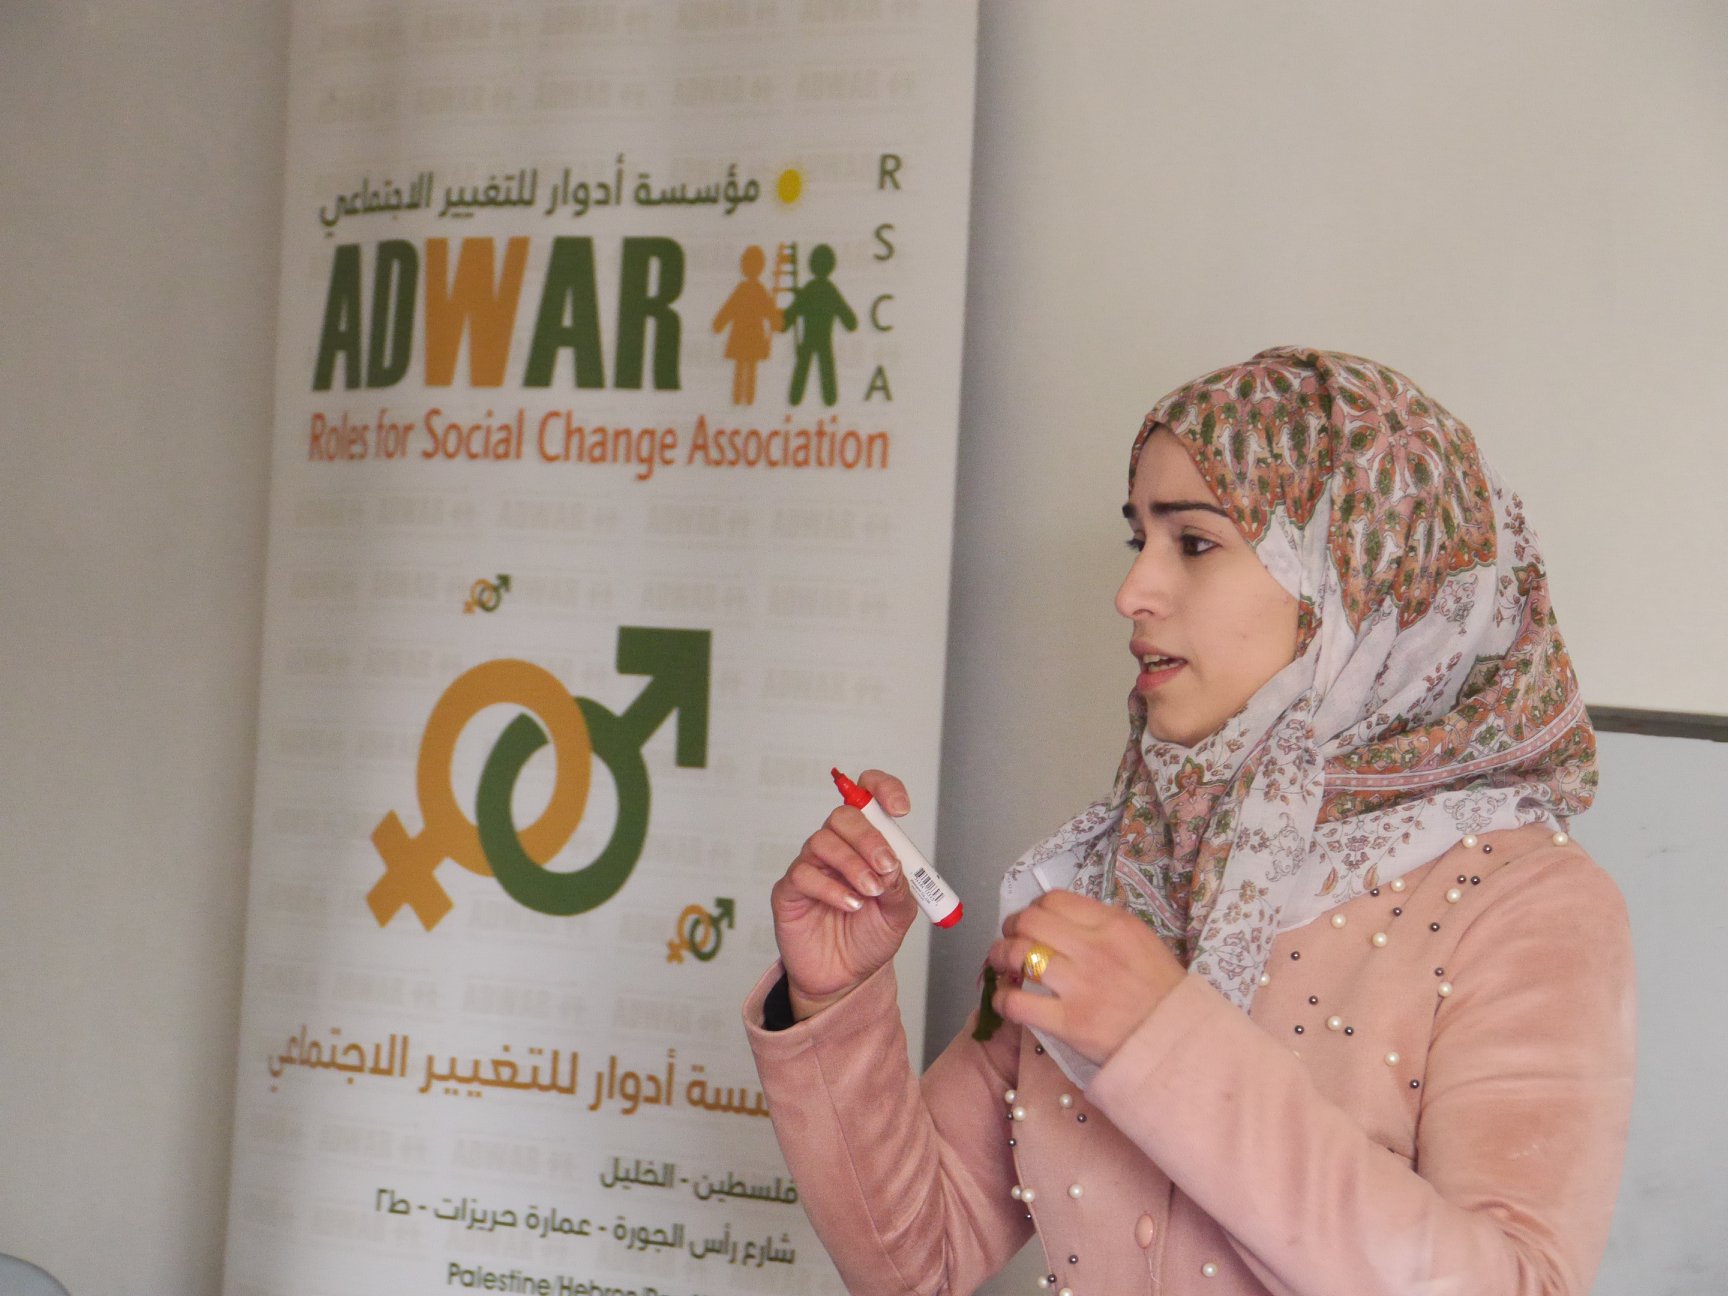  Roles for Social Change Association-ADWAR started its capacity building training program within the project entitled (Palestinian Environment Guards) Funded by Global Environment Facility GEF